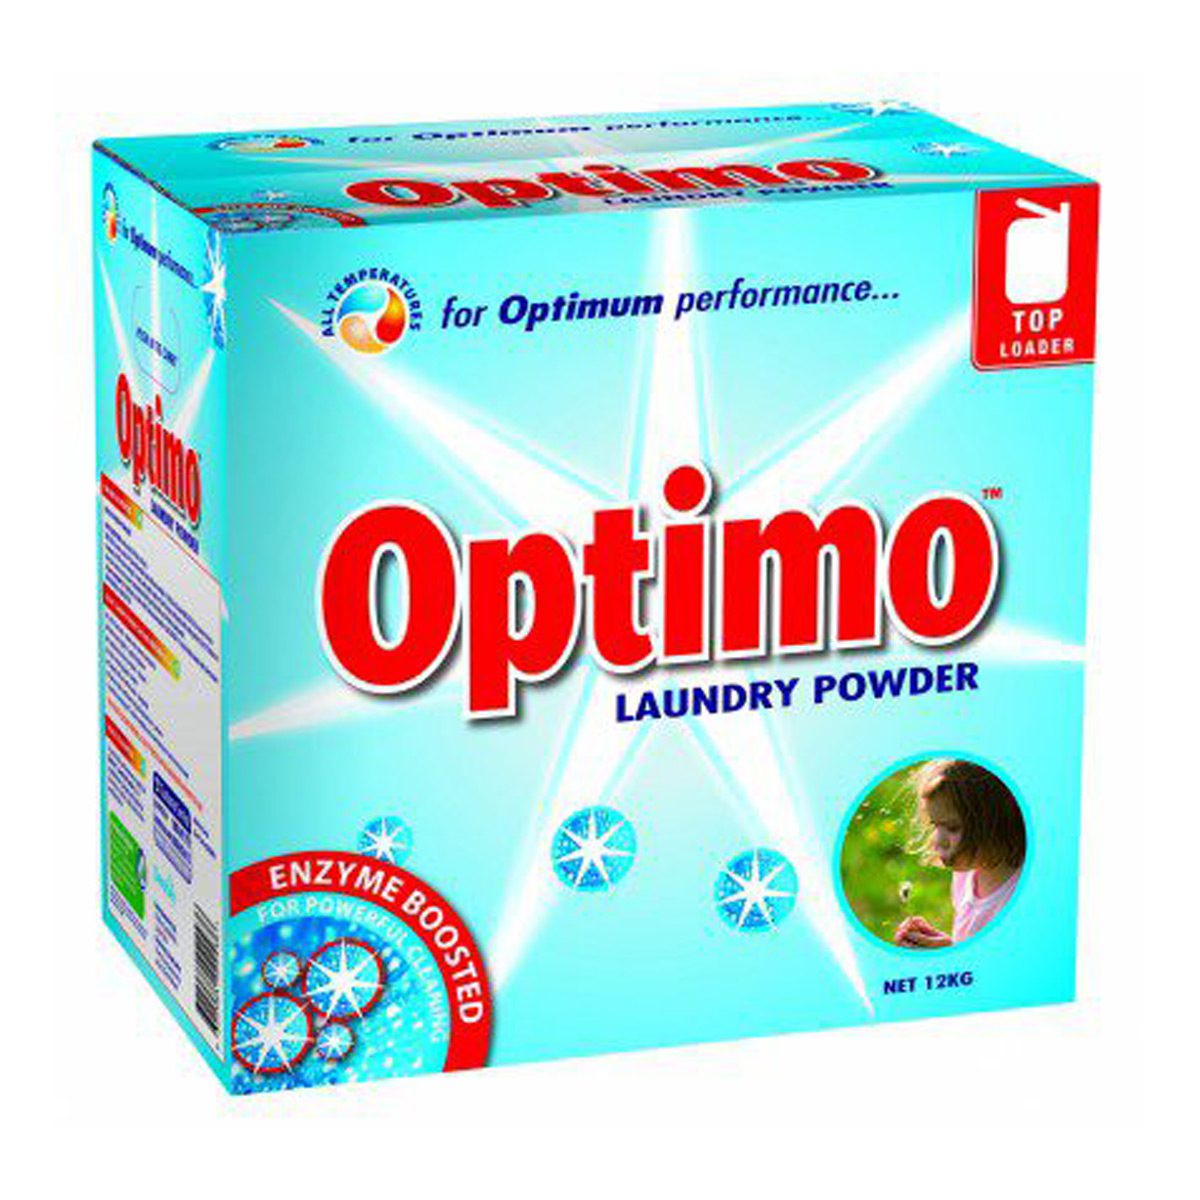 cleaning-products-laundry-optimo-laundry-powder-12kg-enzyme-boosted-greater-cleaning-power-fresh-clean-fragrance-box-12kg.vjs-distributors-5905001